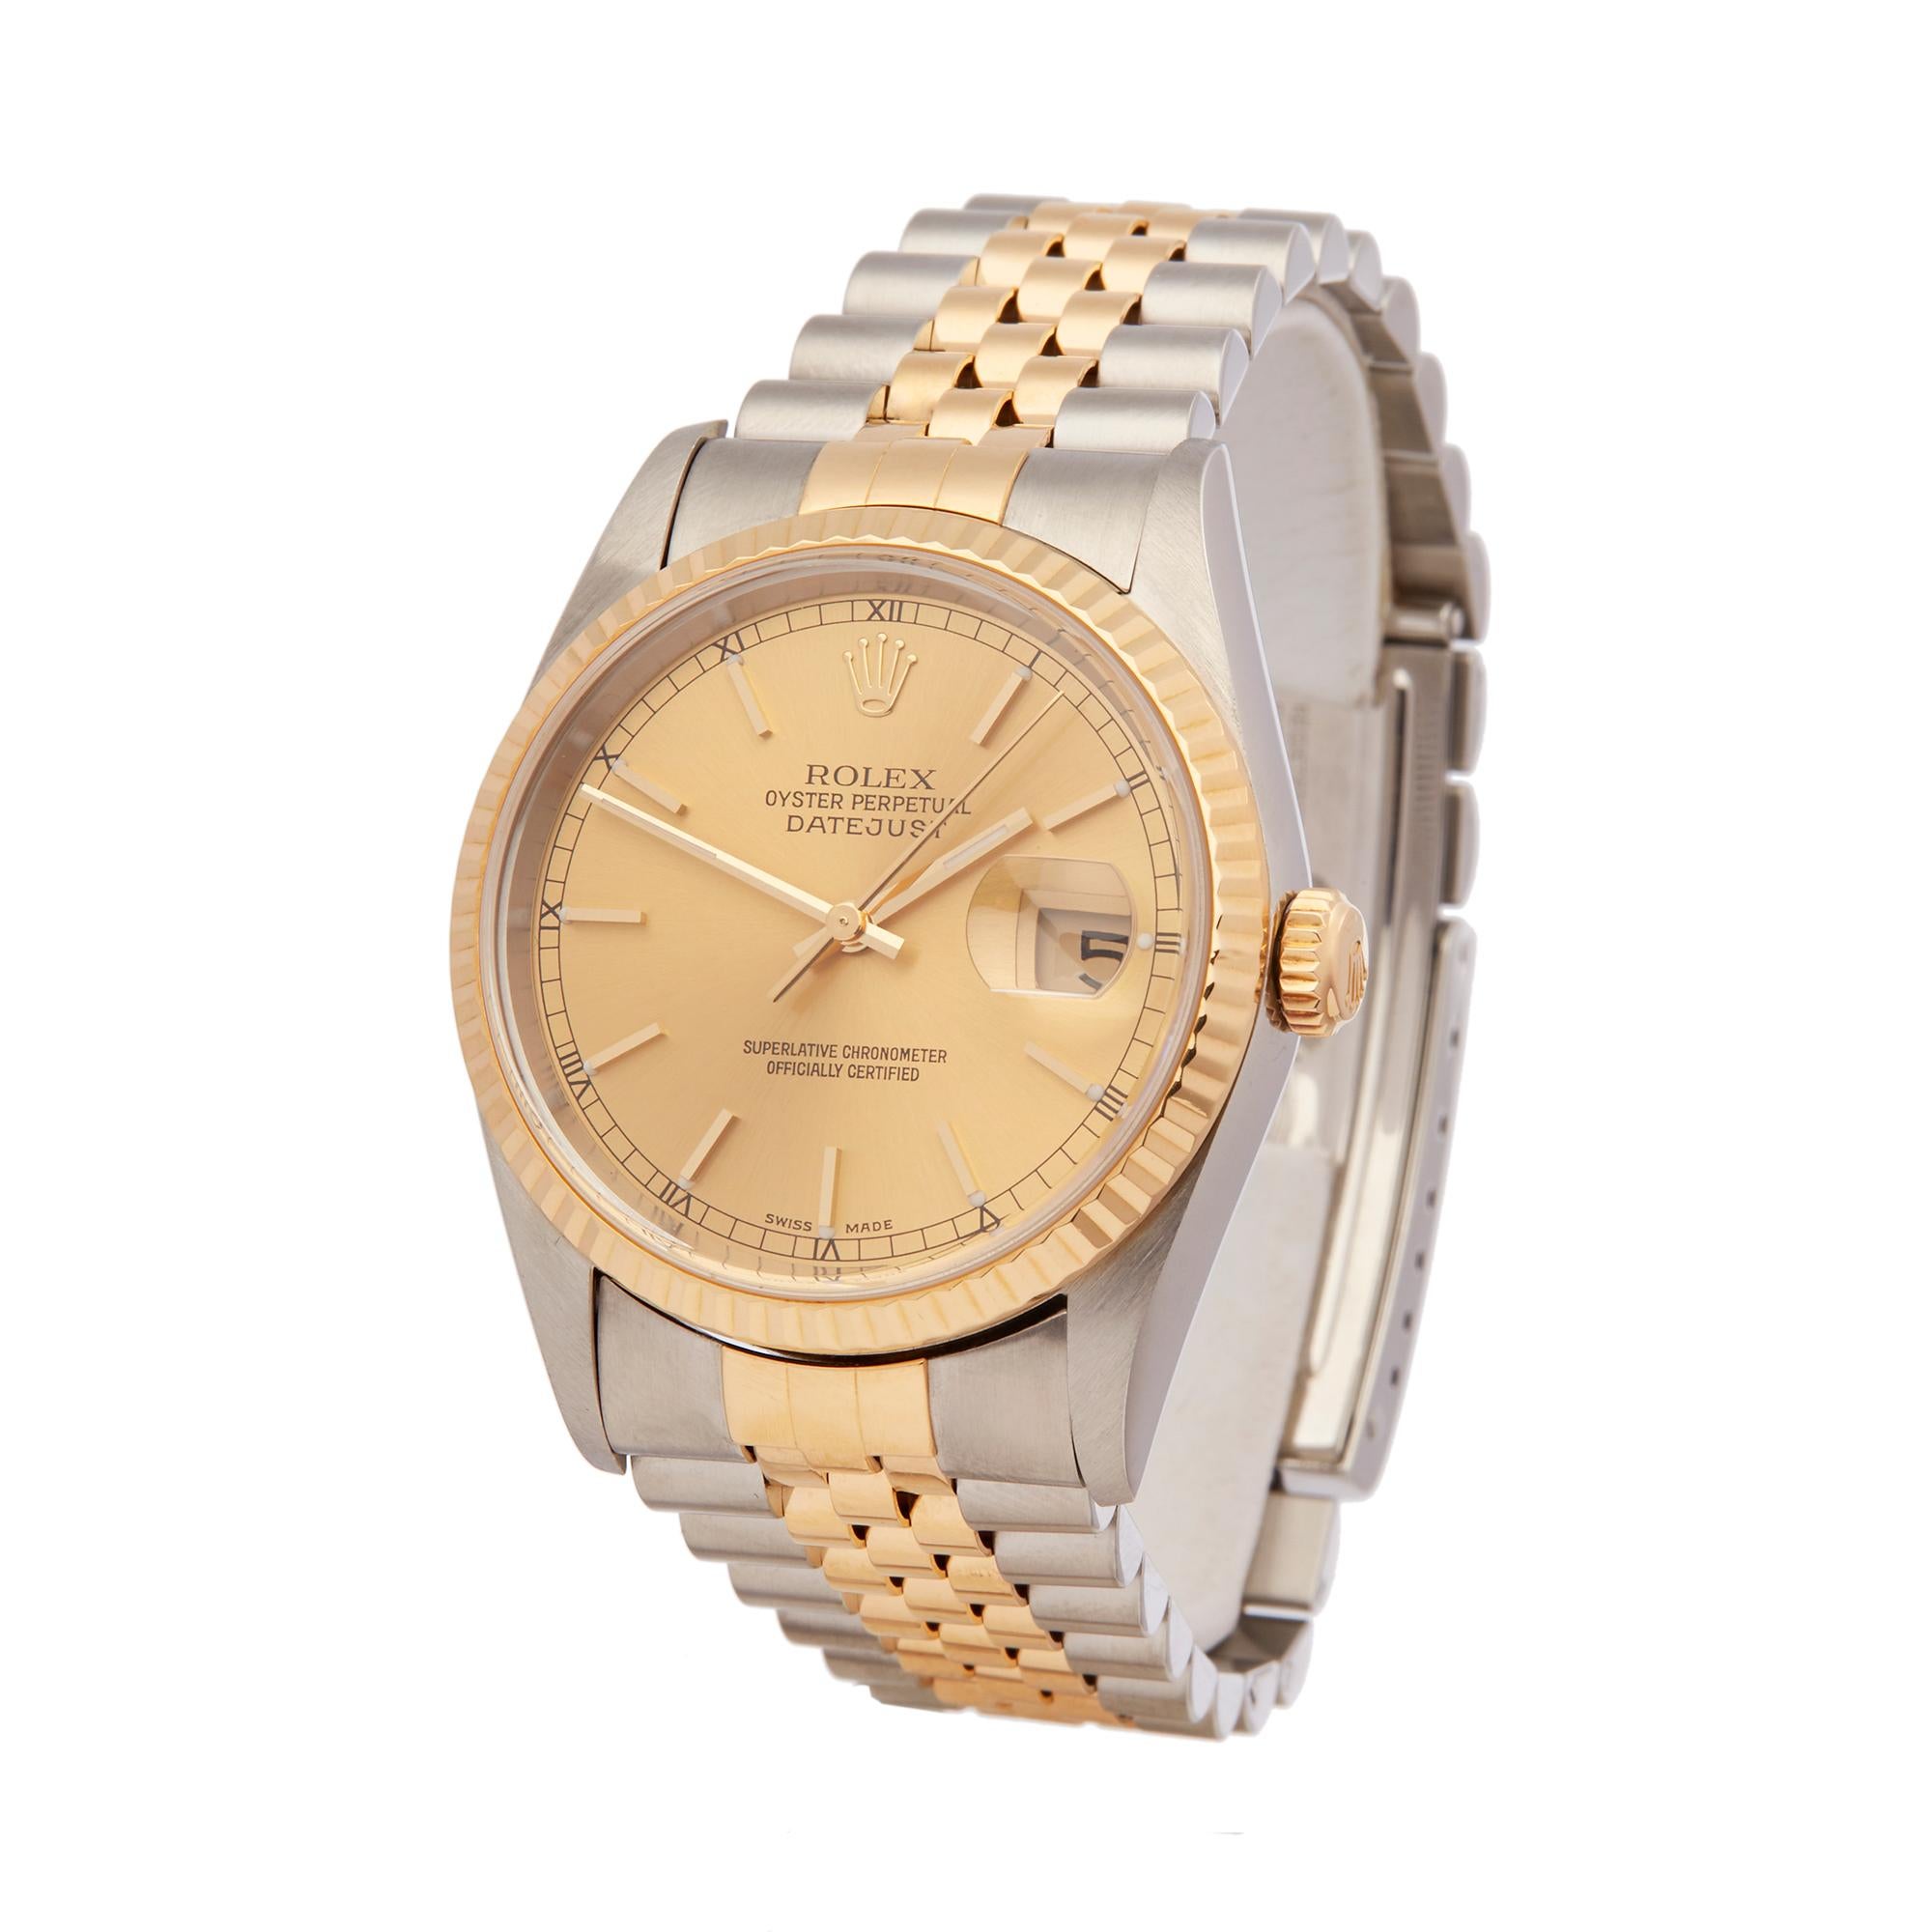 Reference: W5701
Manufacturer: Rolex
Model: Datejust
Model Reference: 16233
Age: 1st September 2004
Gender: Unisex
Box and Papers: Box and Guarantee
Dial: Champagne Baton
Glass: Sapphire Crystal
Movement: Automatic
Water Resistance: To Manufacturers